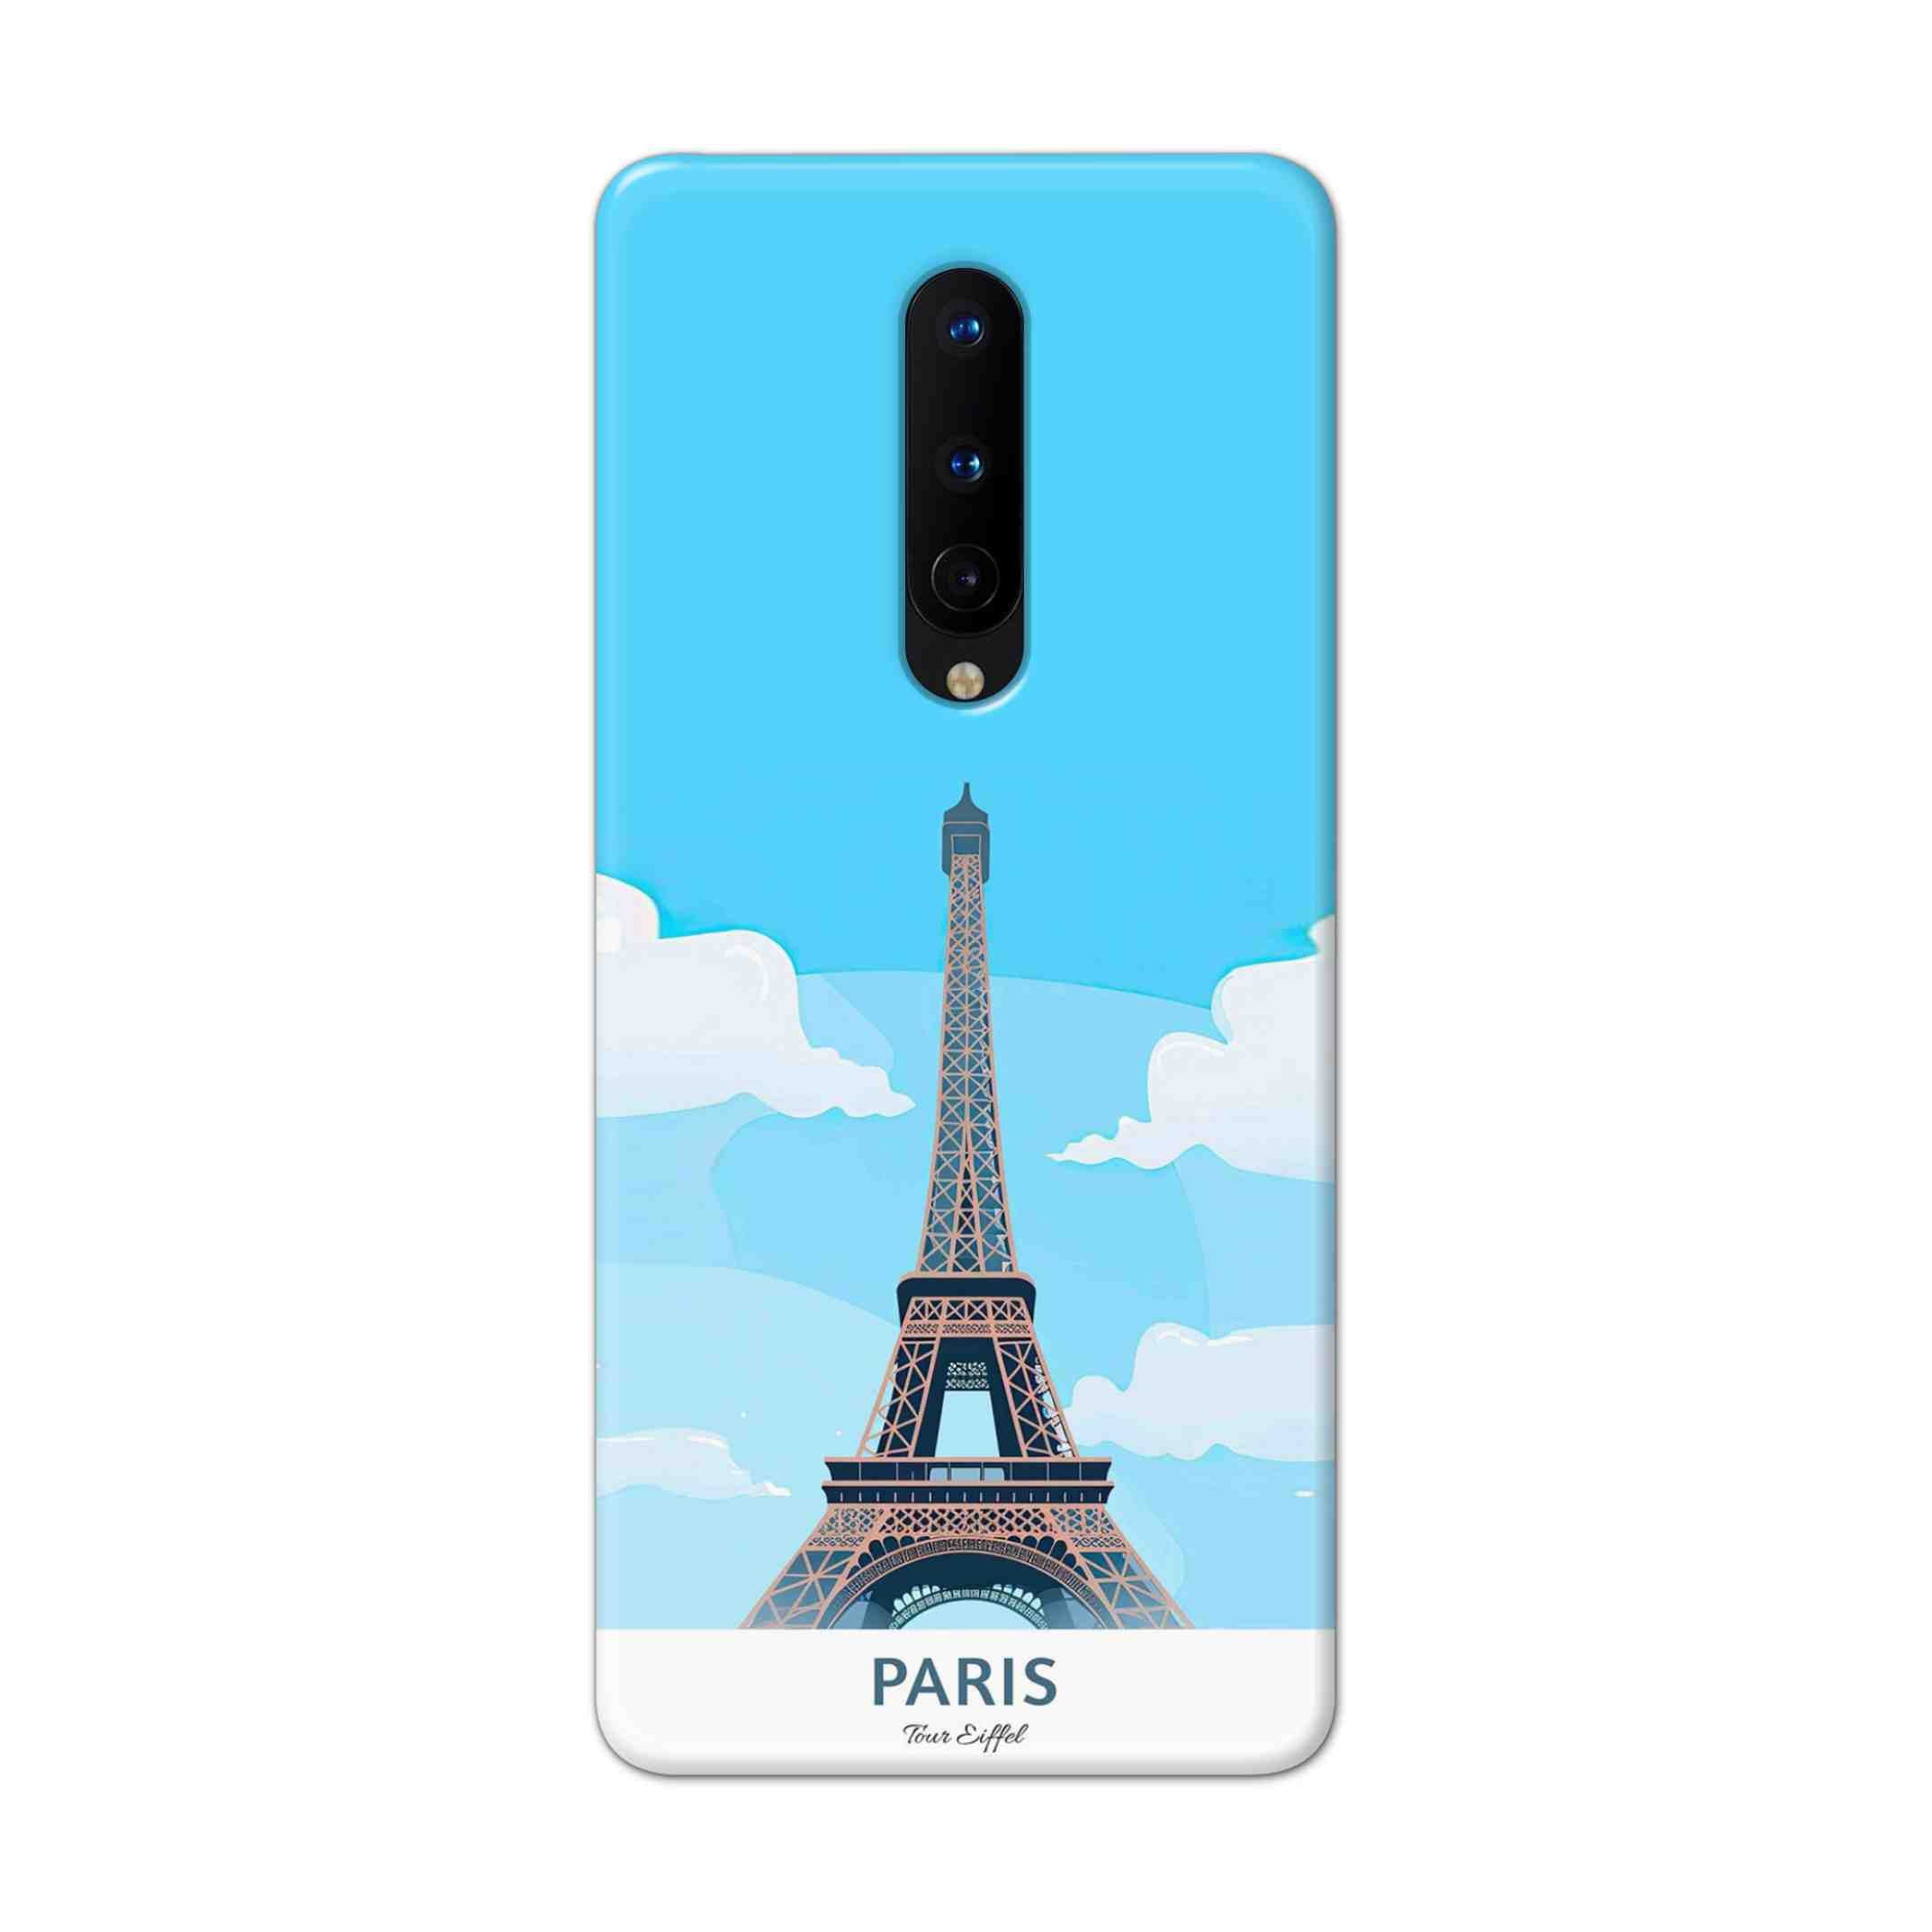 Buy Paris Hard Back Mobile Phone Case Cover For OnePlus 8 Online